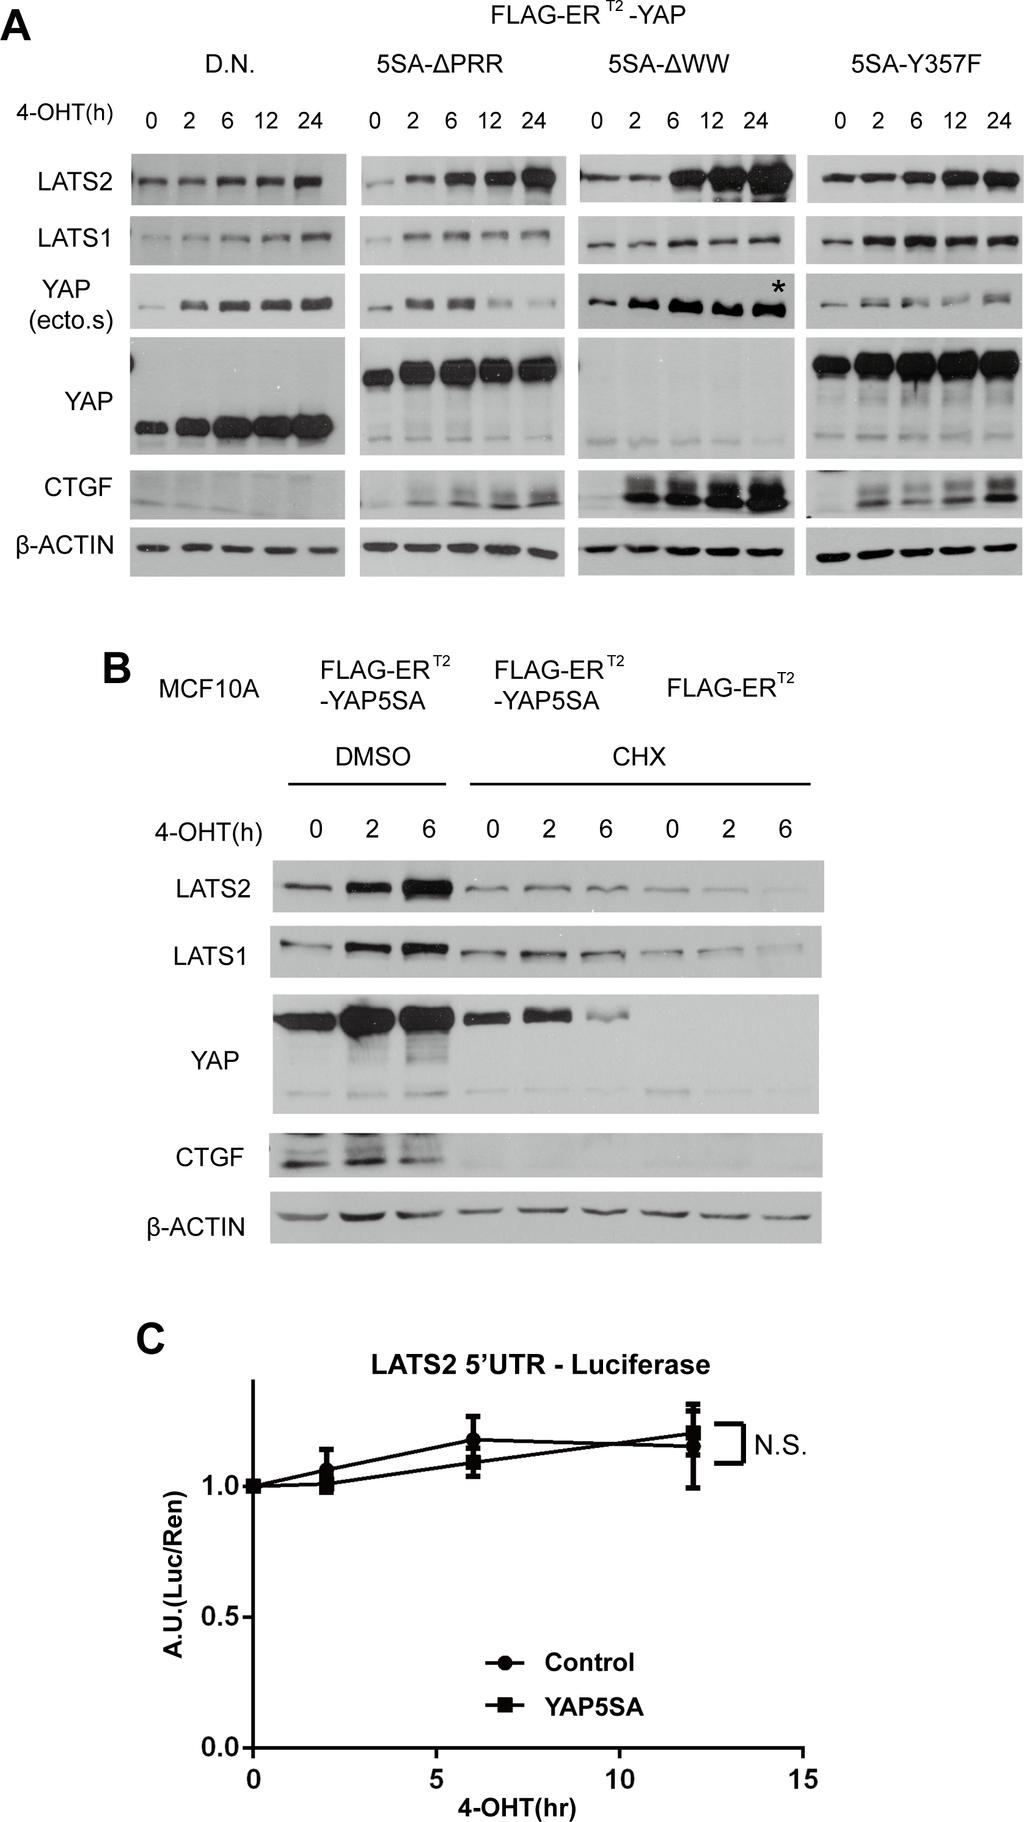 Supplementary Figure S3: Up-regulation of LATS2 by YAP activation mainly reflects transcriptional activation.